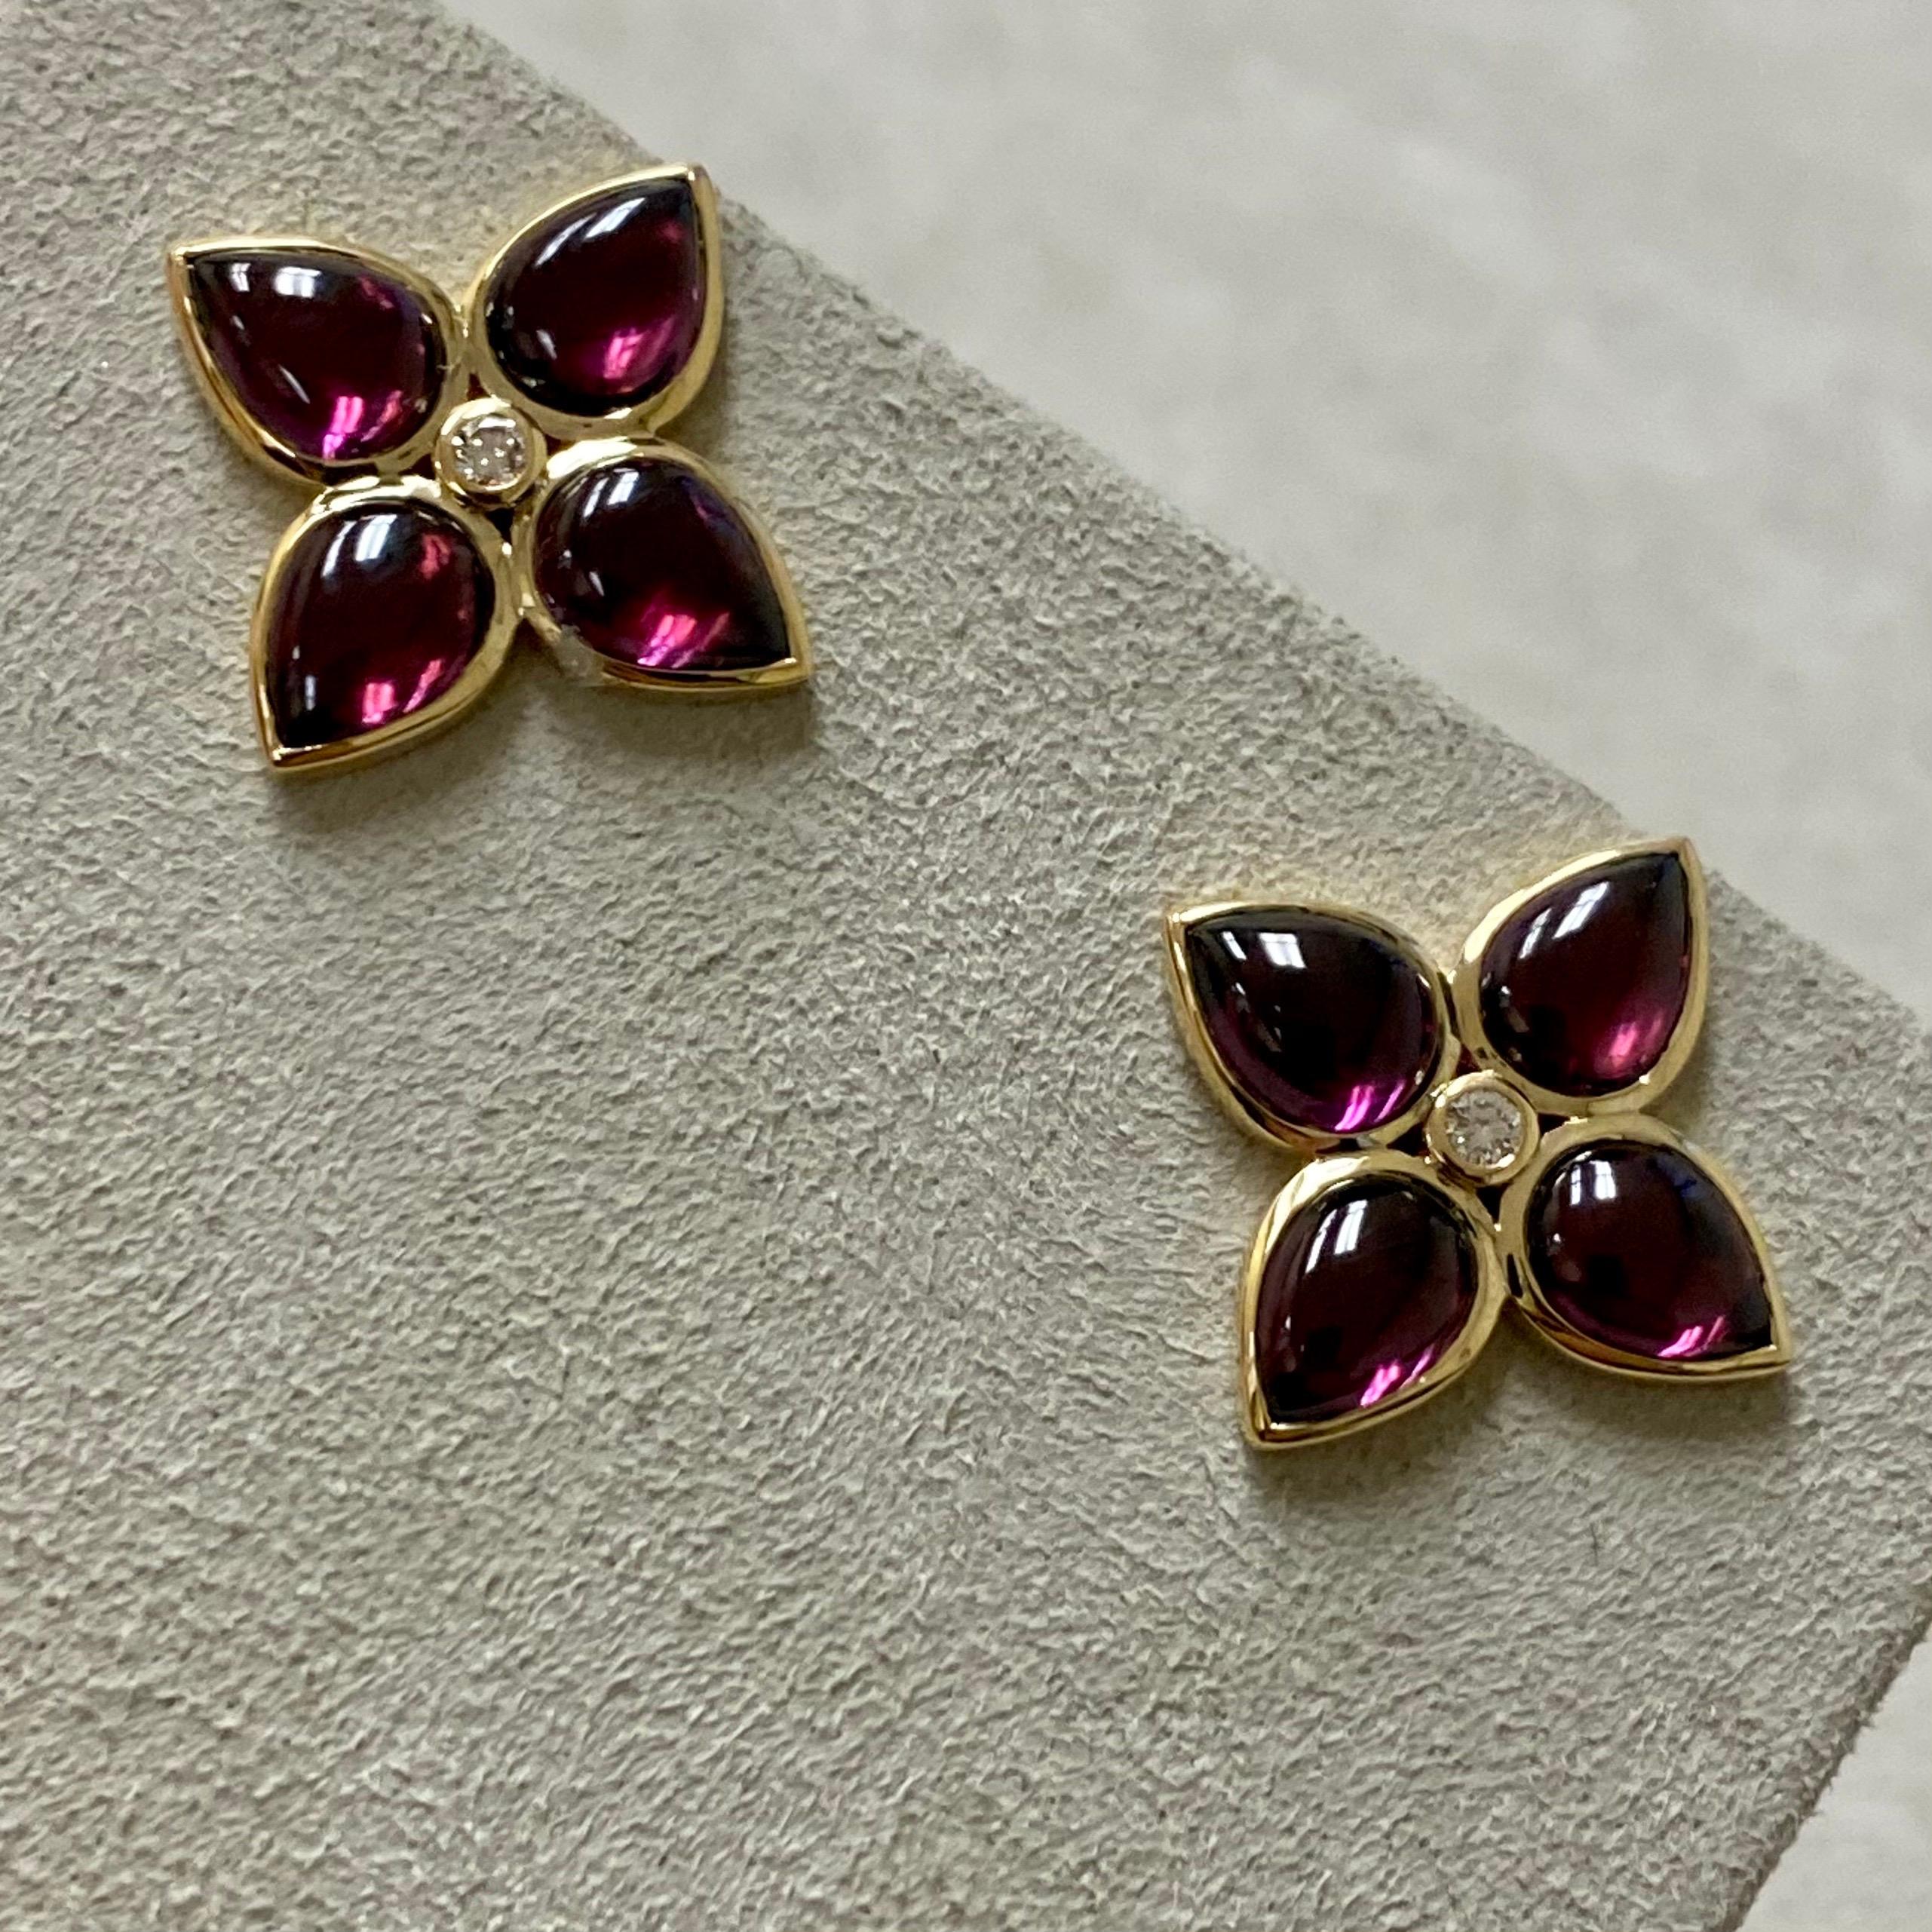 Created in 18 karat yellow gold
Rhodolite Garnet 12 carats approx.
Diamonds 0.09 carat approx.
Limited edition

Crafted in lustrous 18 karat yellow gold, these limited edition earrings feature an extravagance of Rhodolite Garnet in 12 carats,